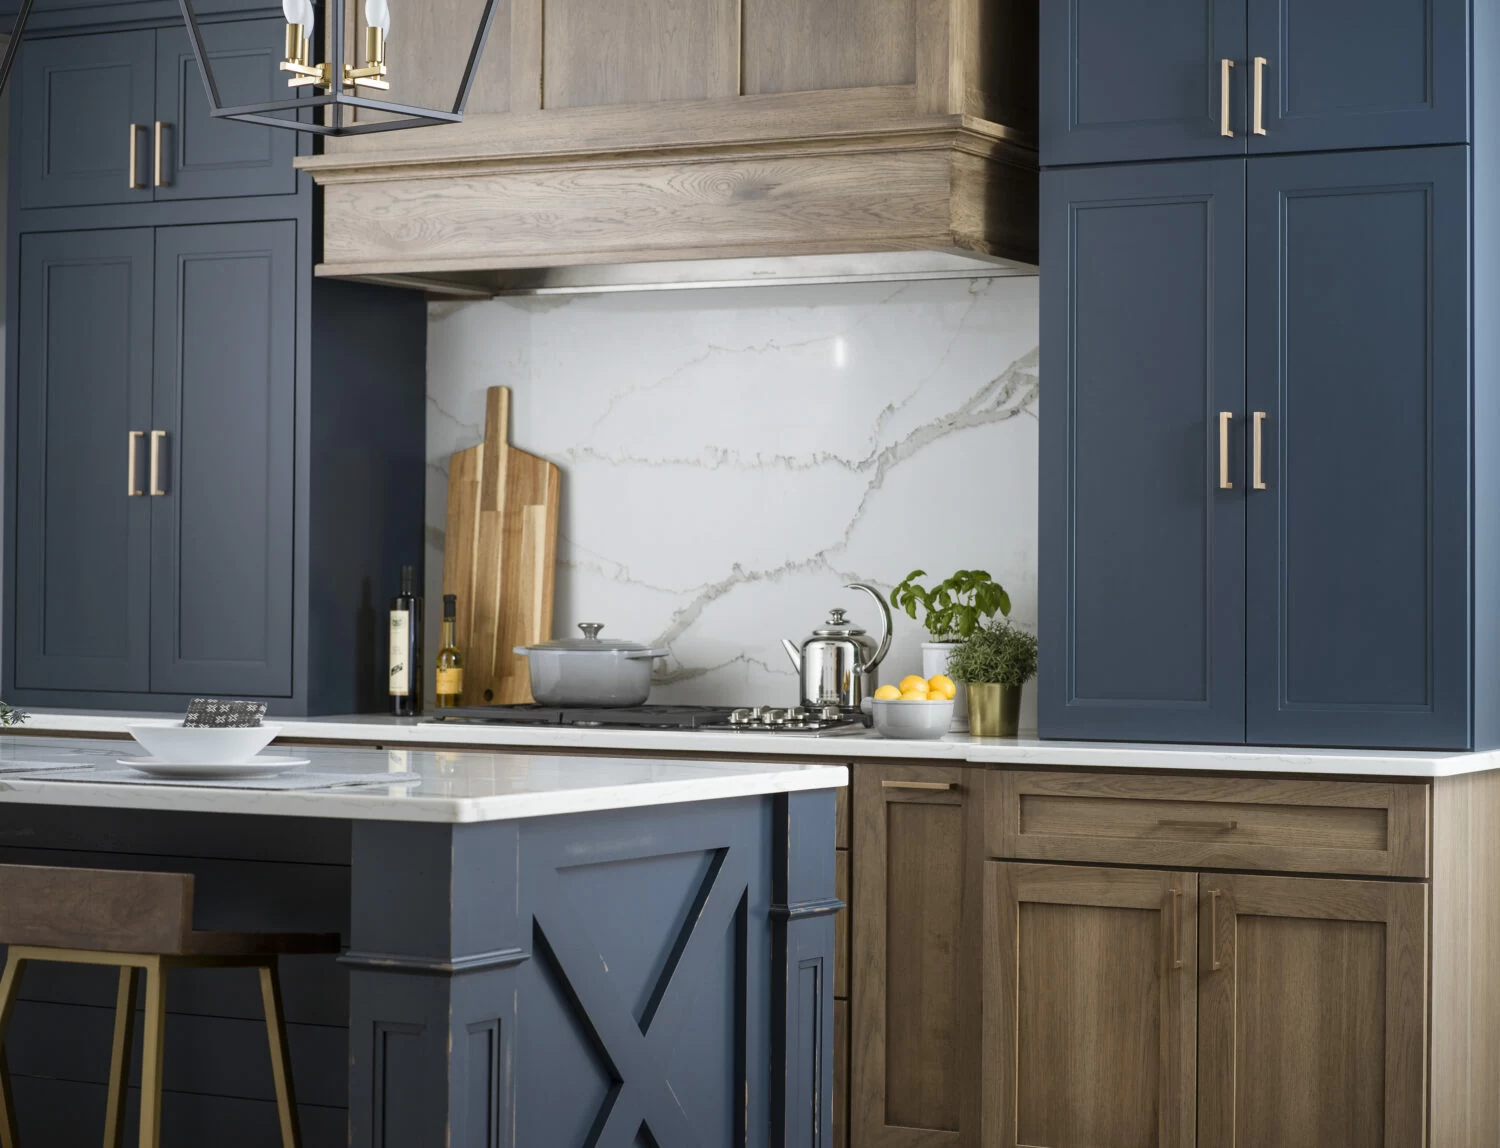 Transitional kitchen cabinetry